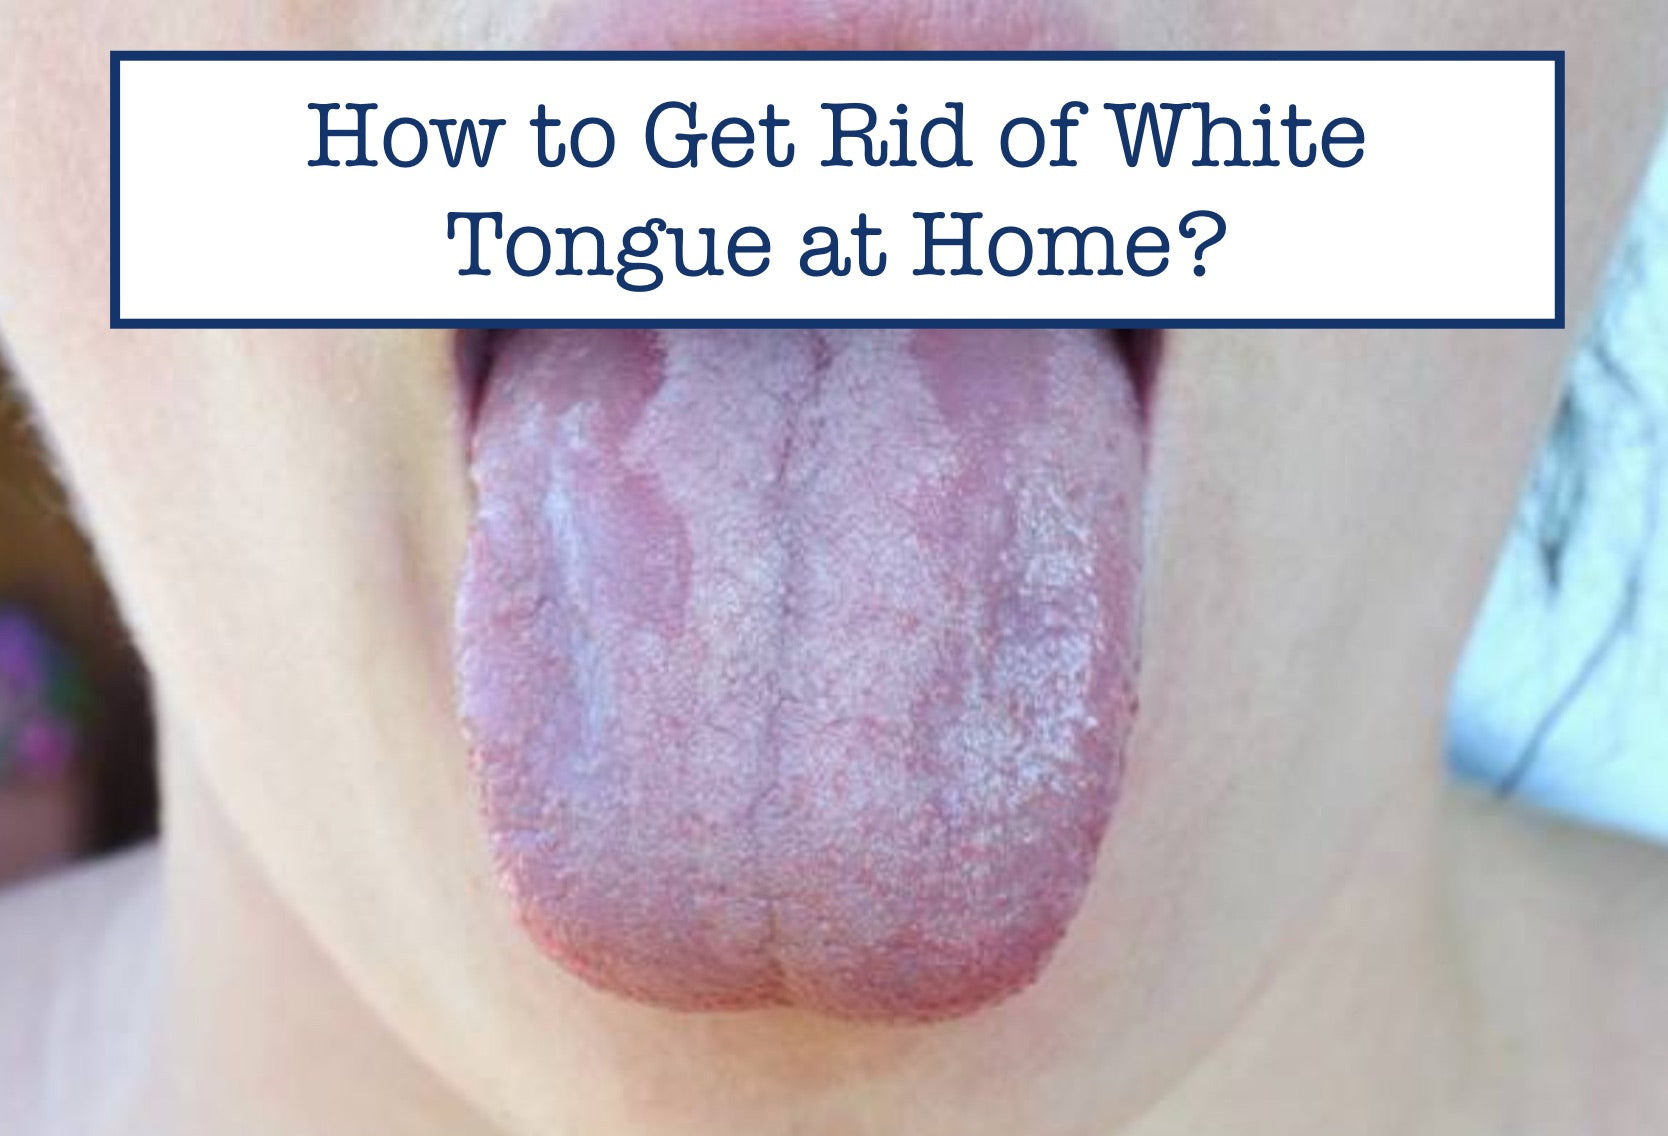 How to Get Rid of White Tongue at Home